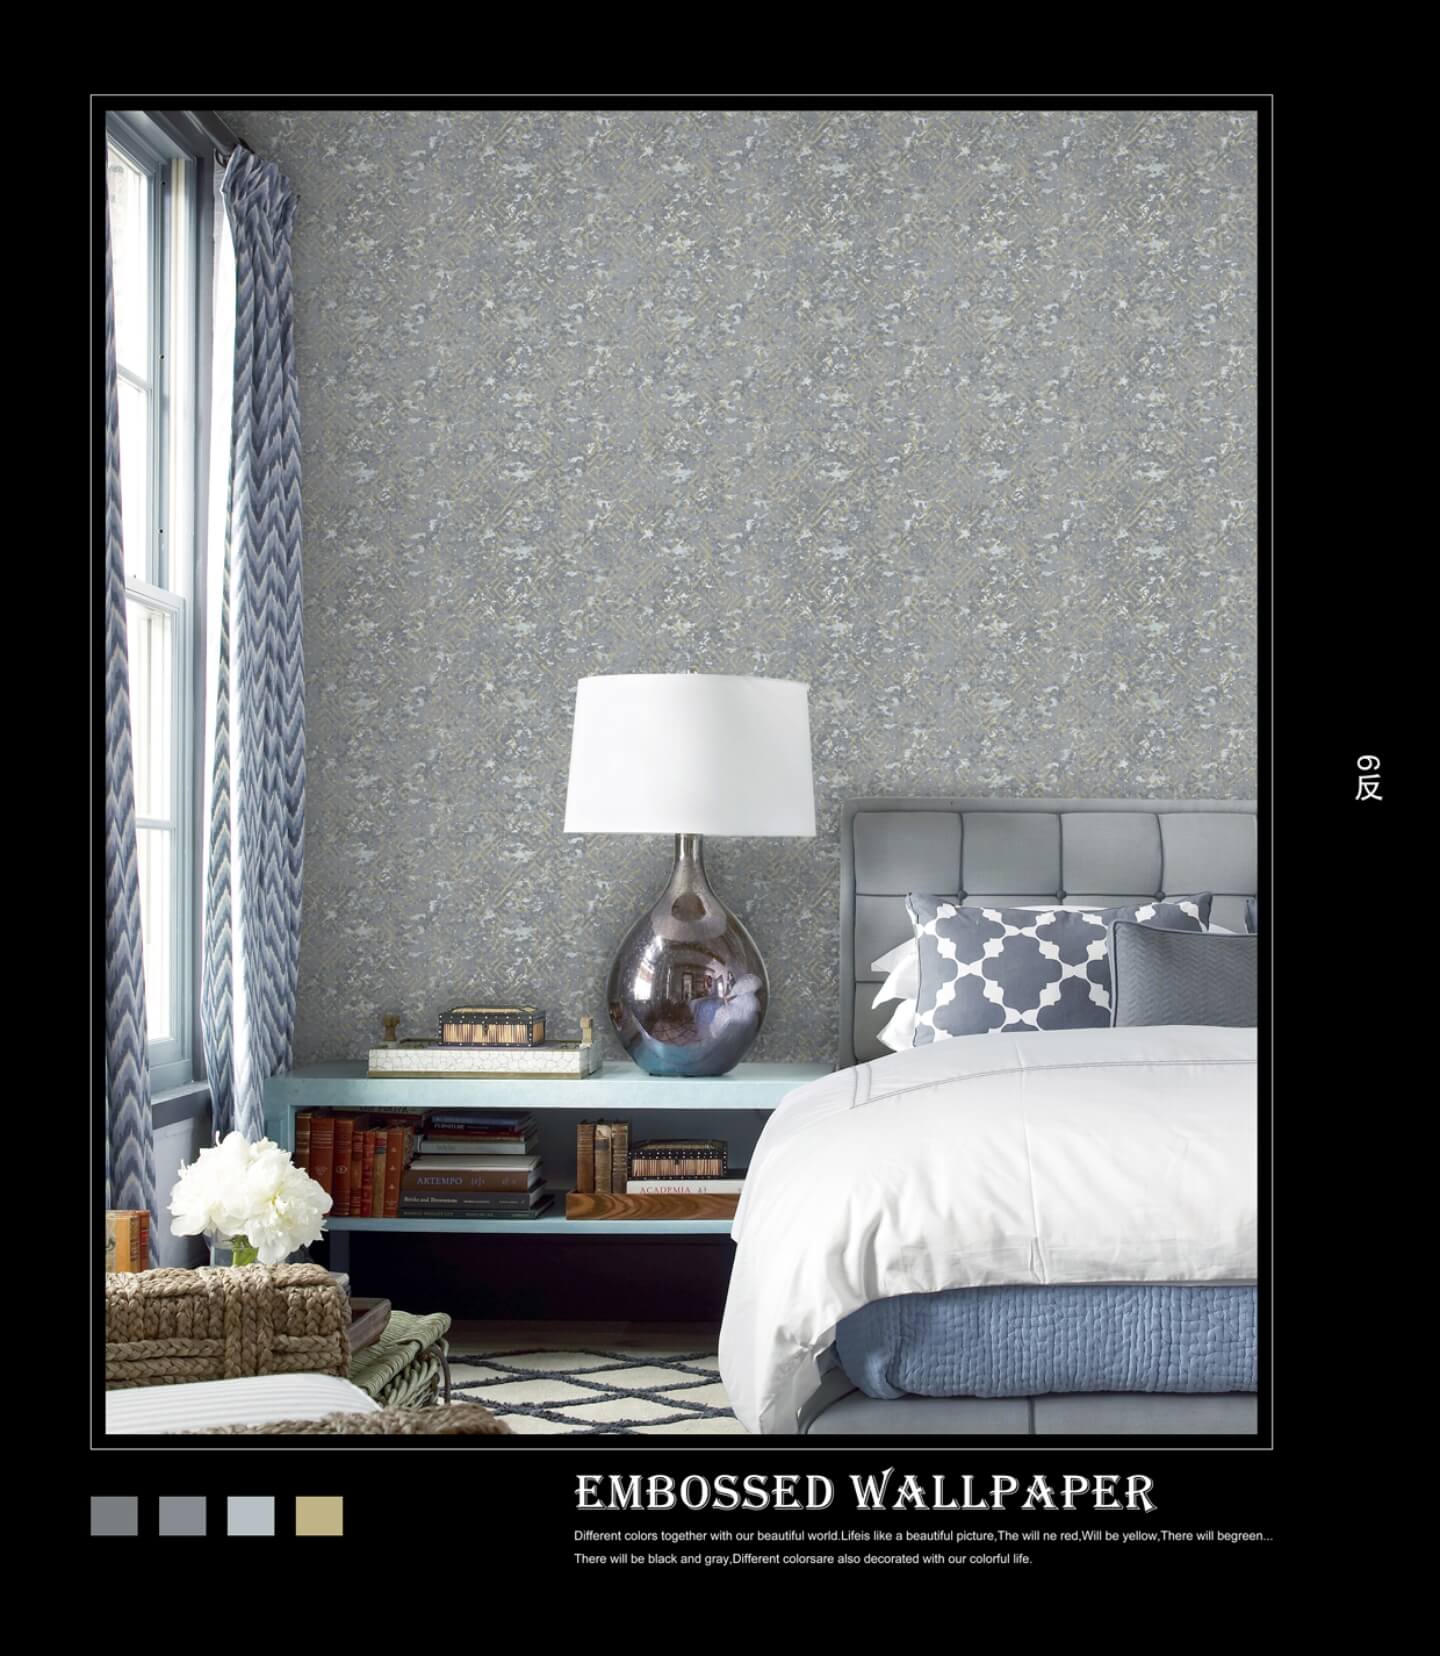 Multicolor Non-Adhesive 3D Designer Wallpaper Suitable For Bedroom, Living Room, Office, High-Quality PVC Water-resistant Wallpapers (15)